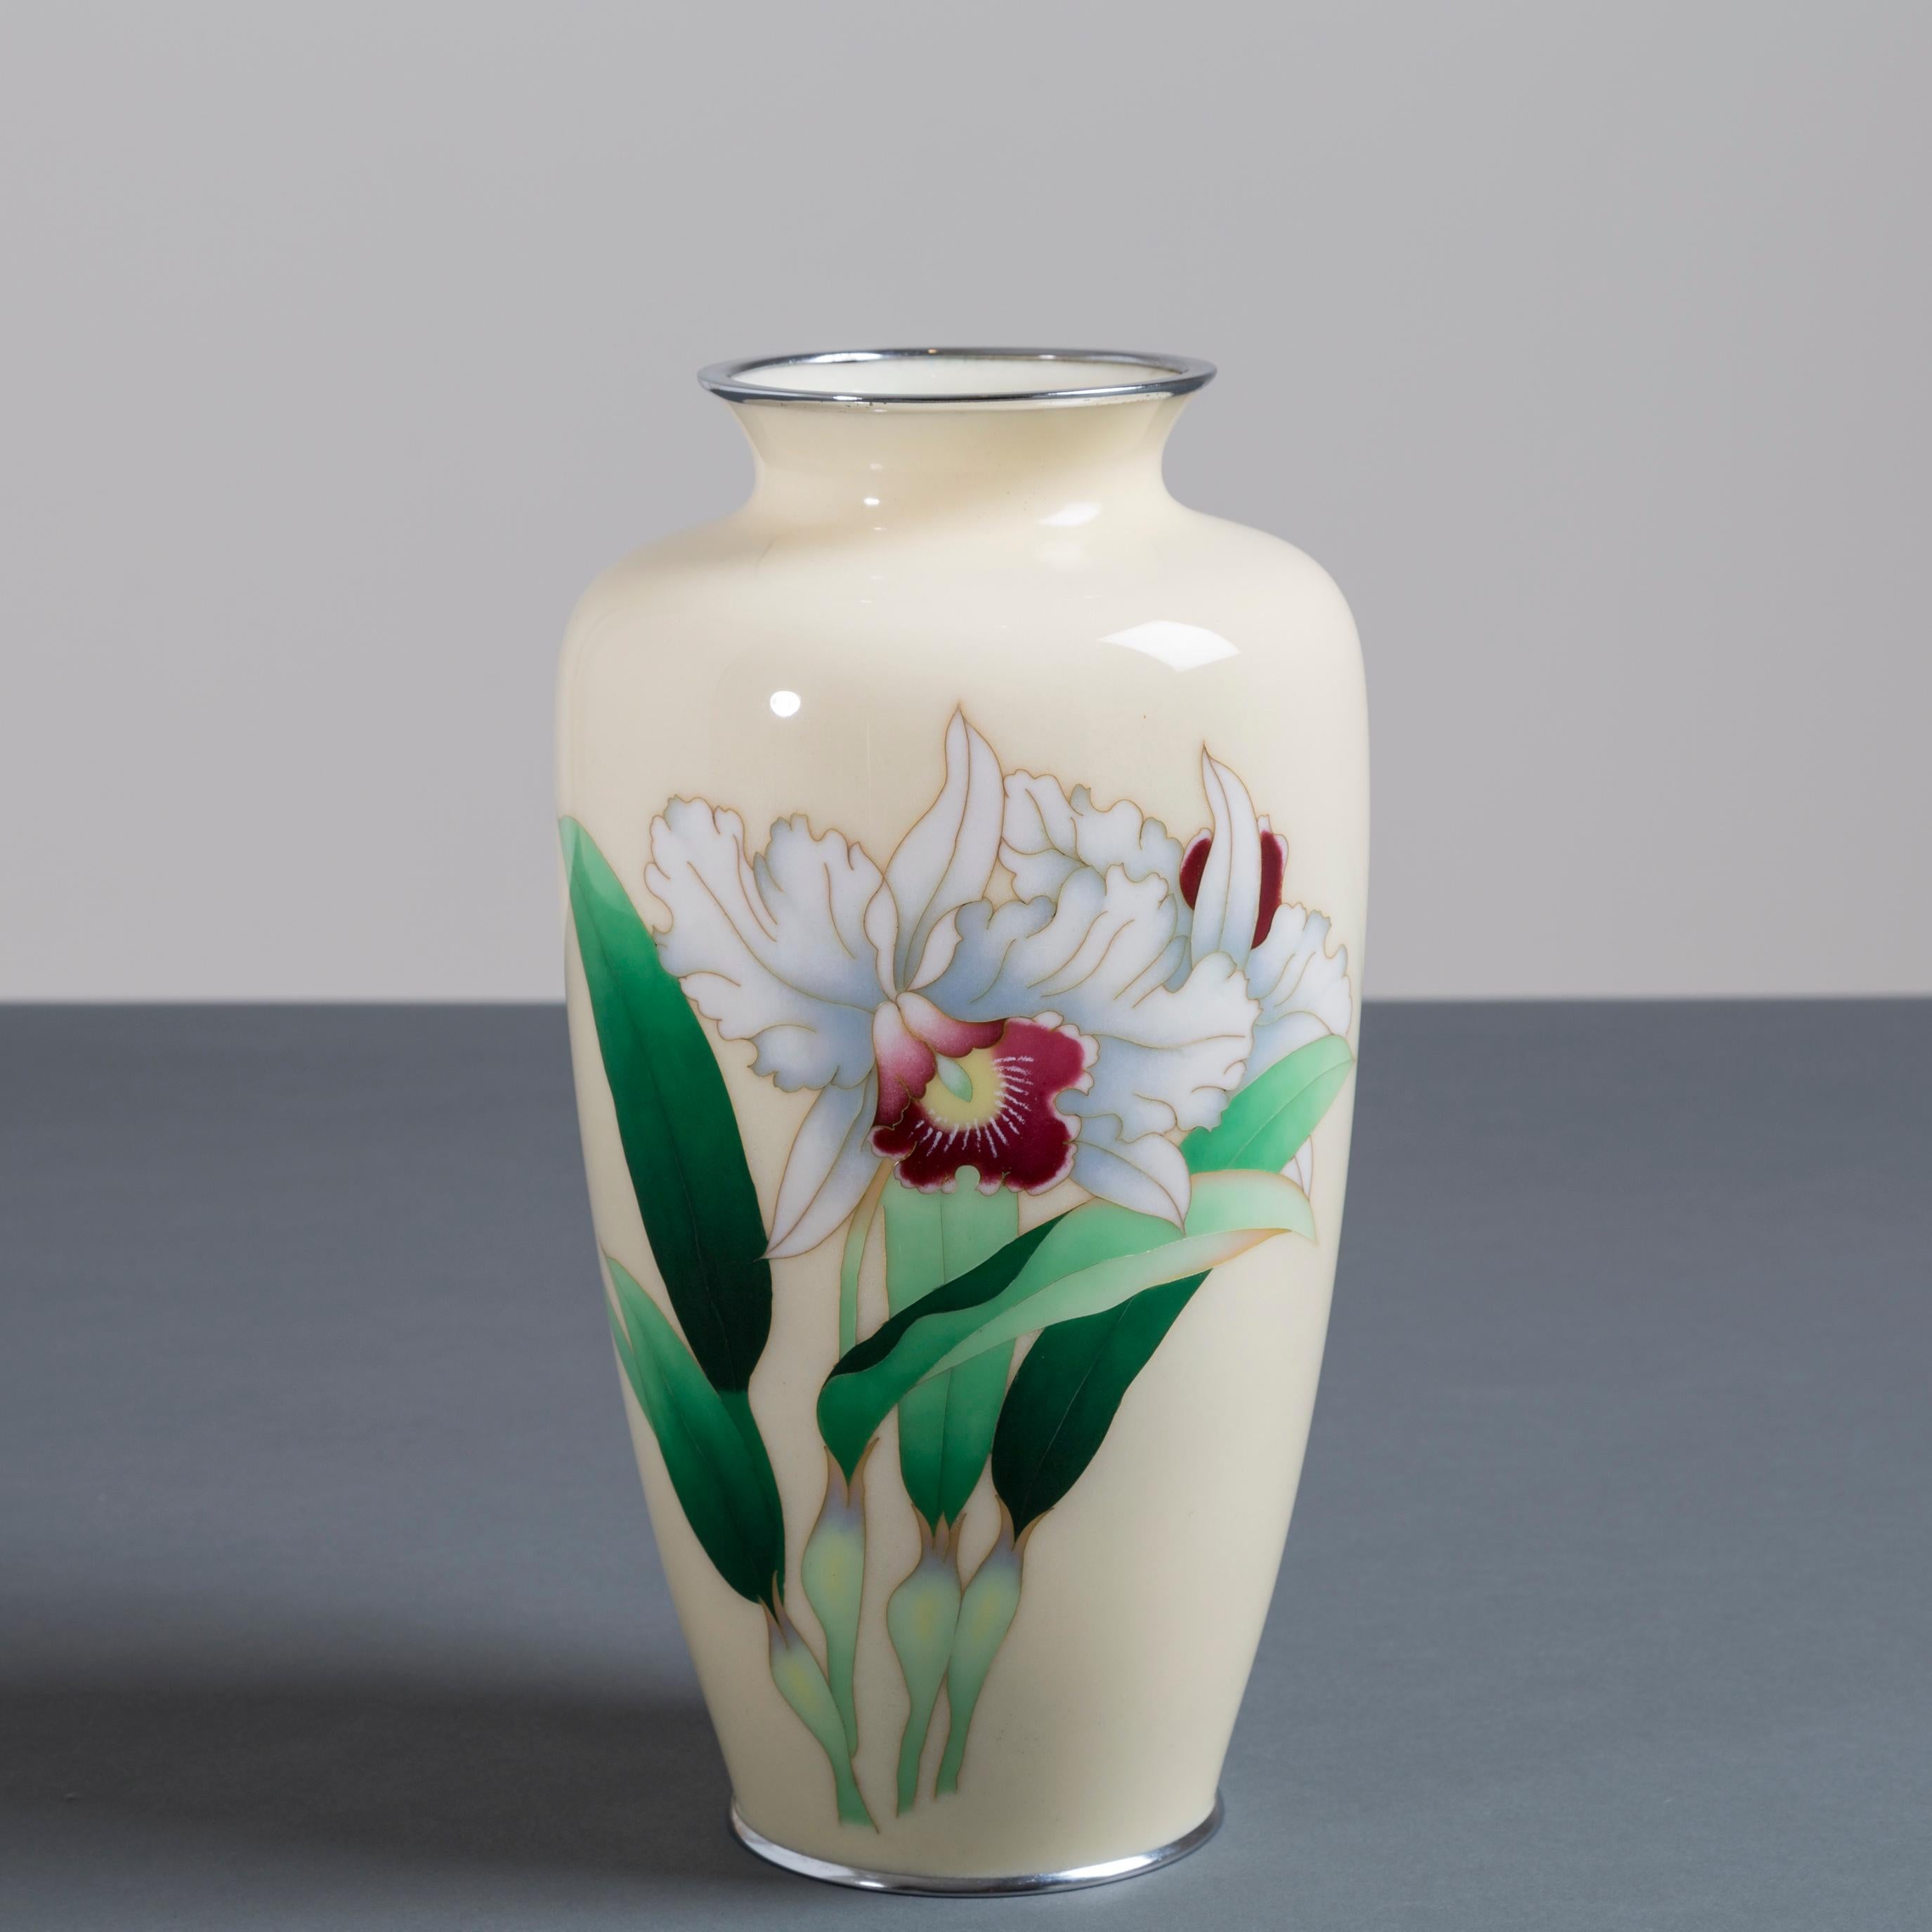 20th Century Japanese Cloisonné Enamel Vase from the Showa Period For Sale